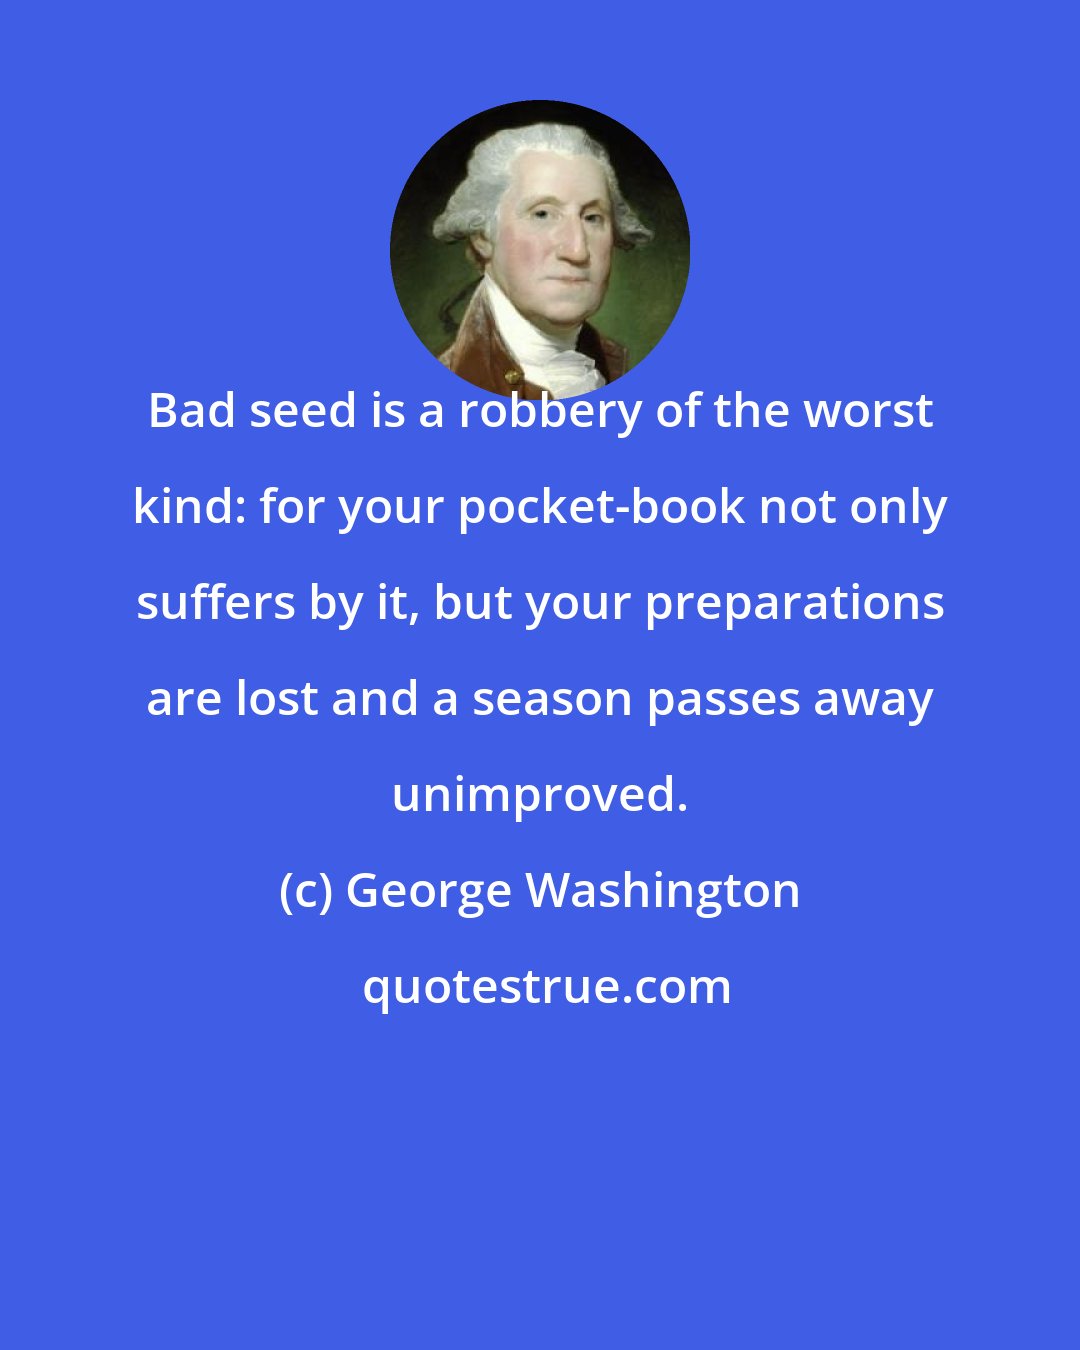 George Washington: Bad seed is a robbery of the worst kind: for your pocket-book not only suffers by it, but your preparations are lost and a season passes away unimproved.